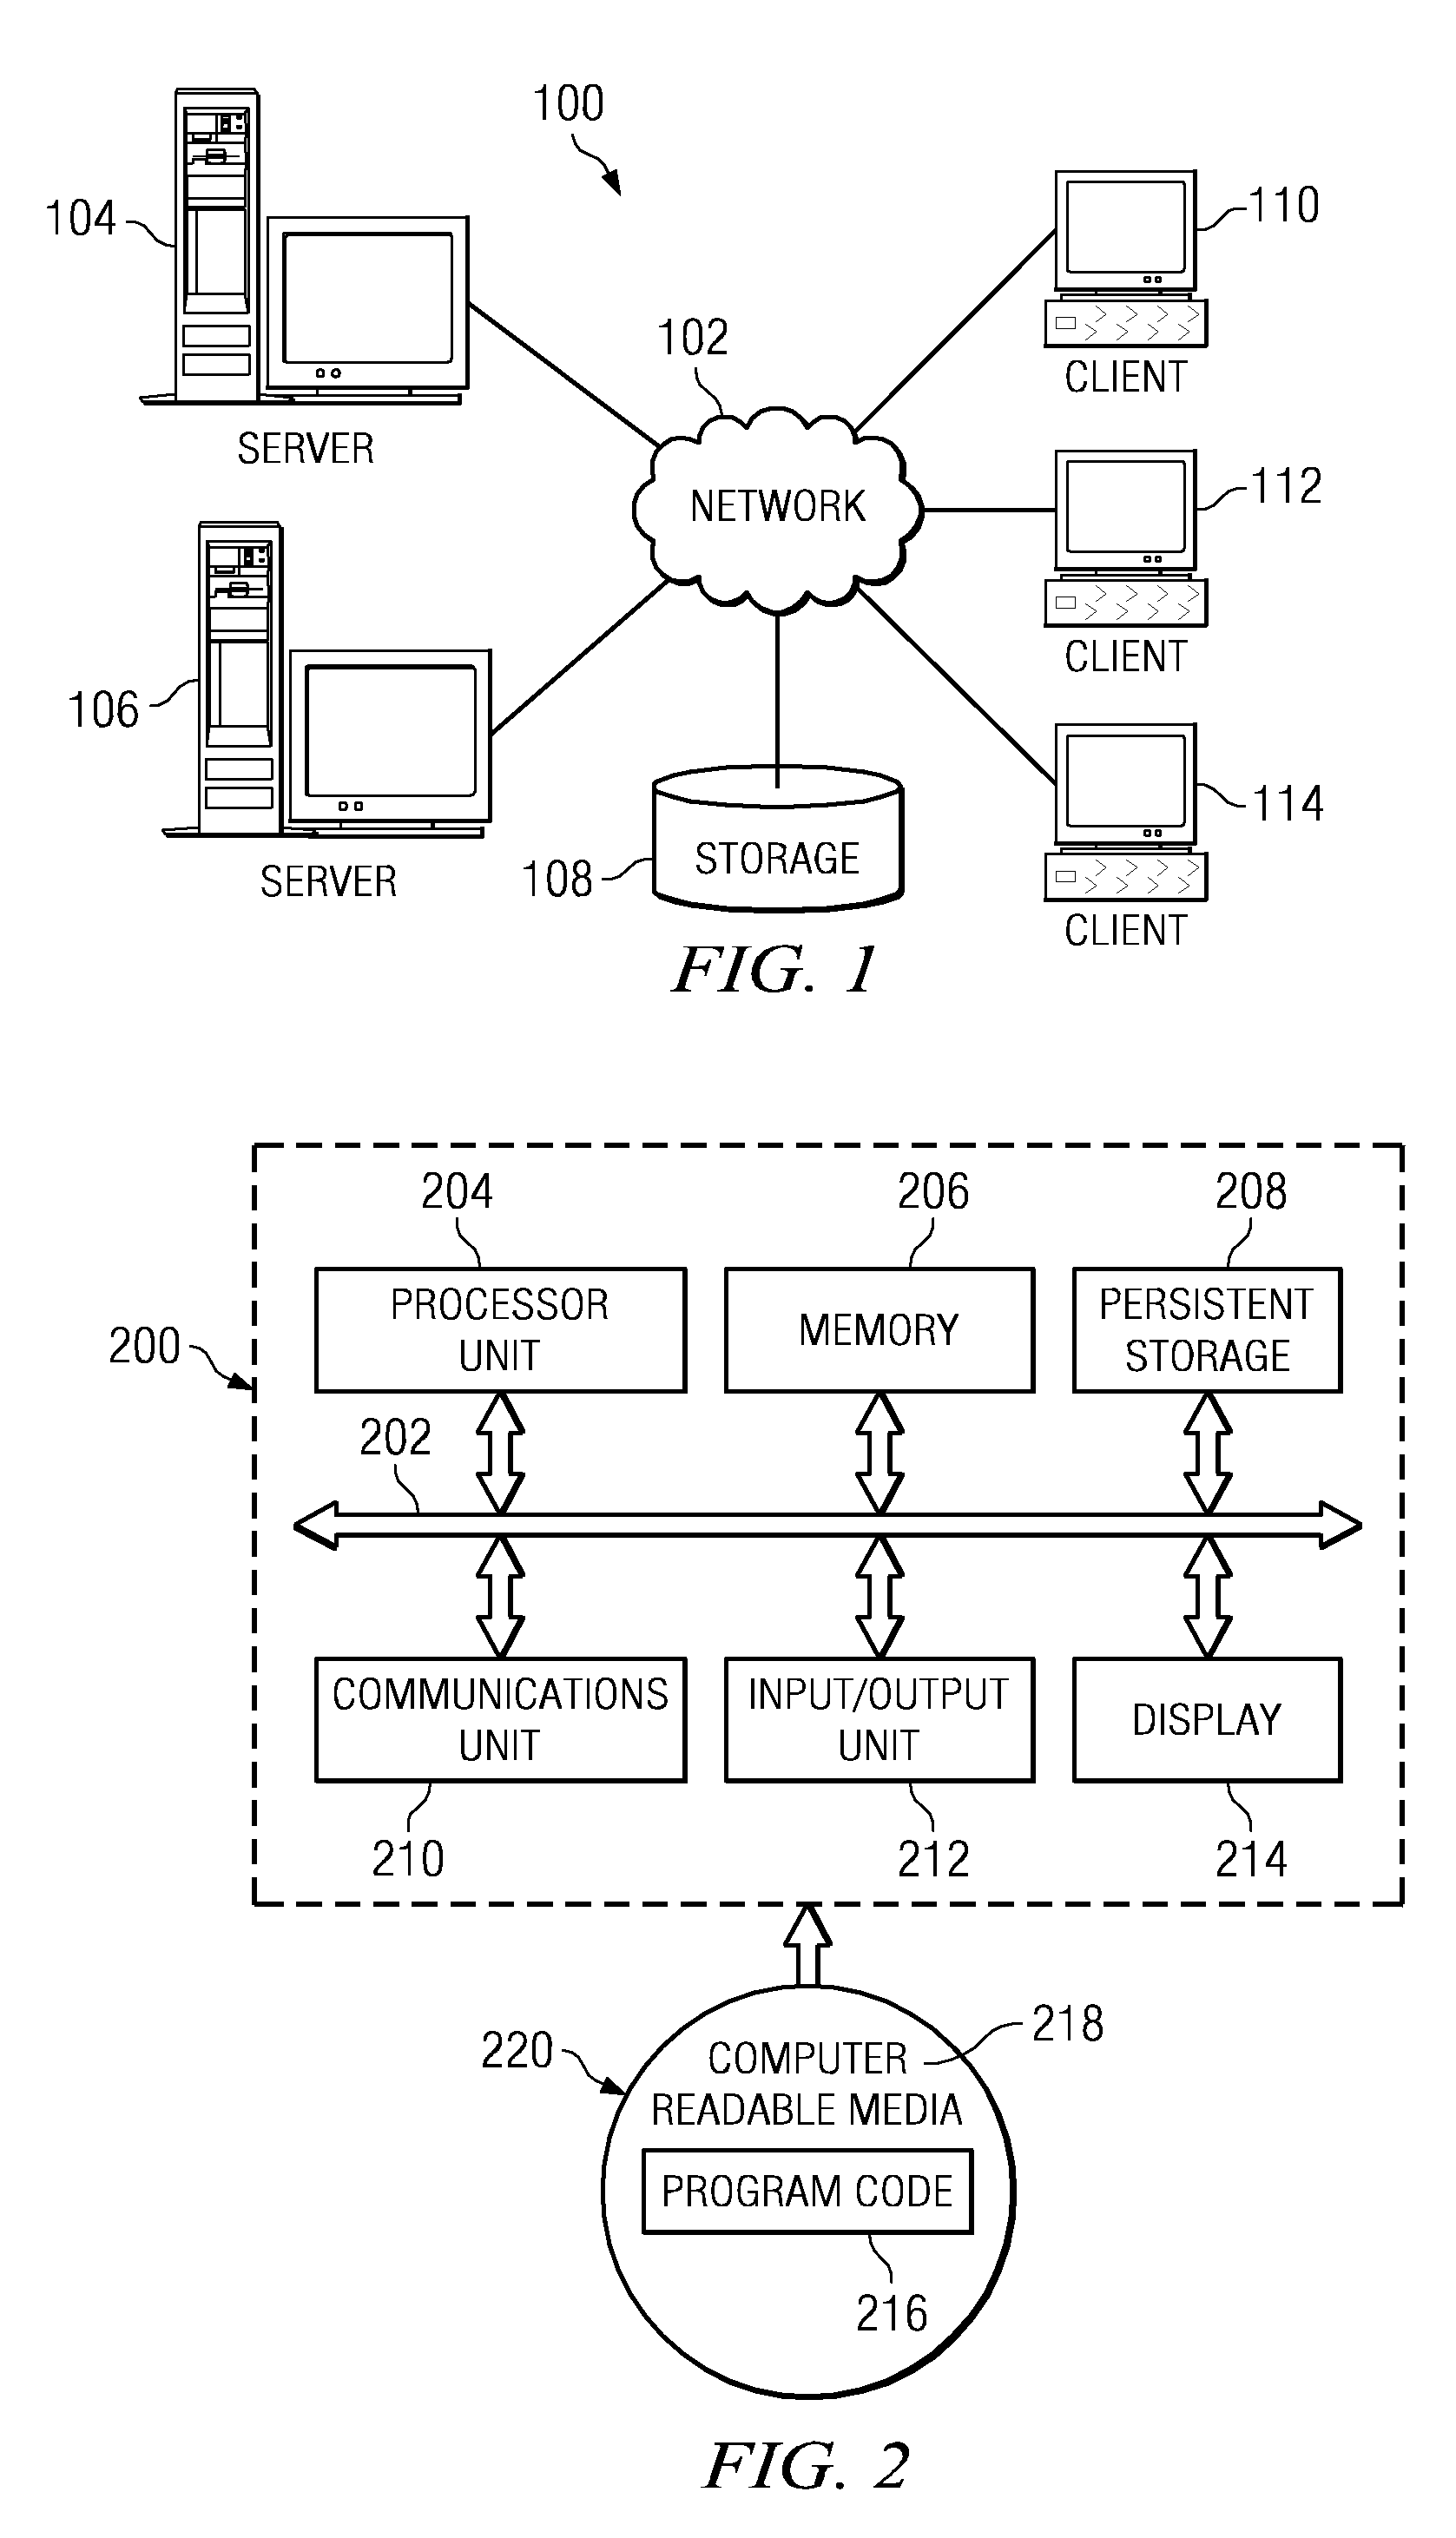 Method and apparatus for specifying an order for changing an operational state of software application components